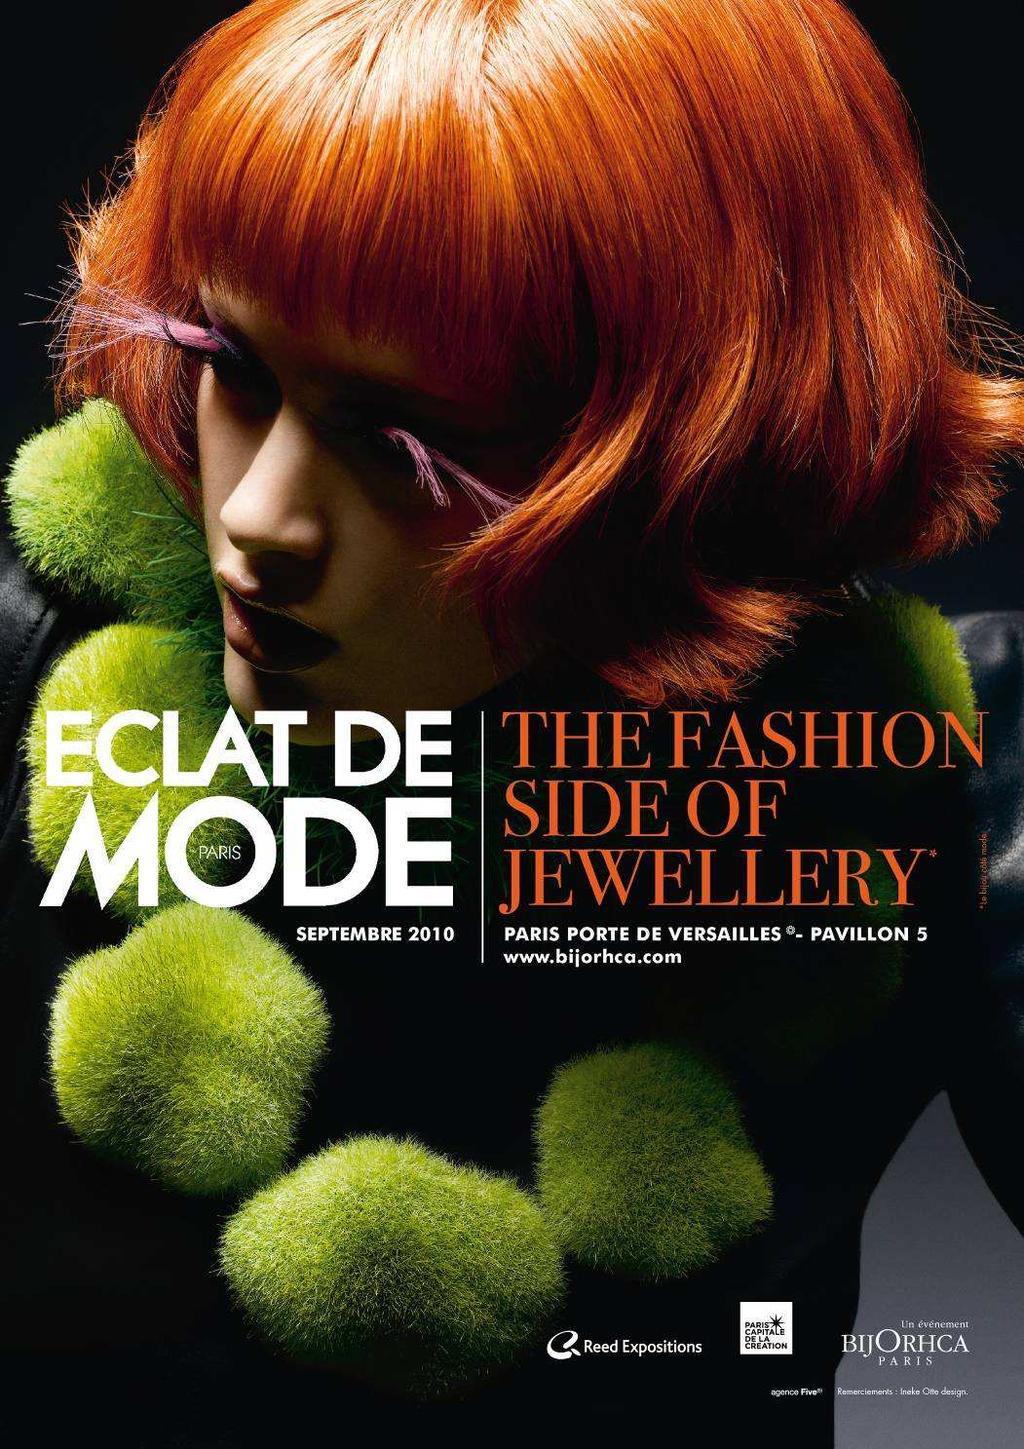 See you at the next Eclat de Mode